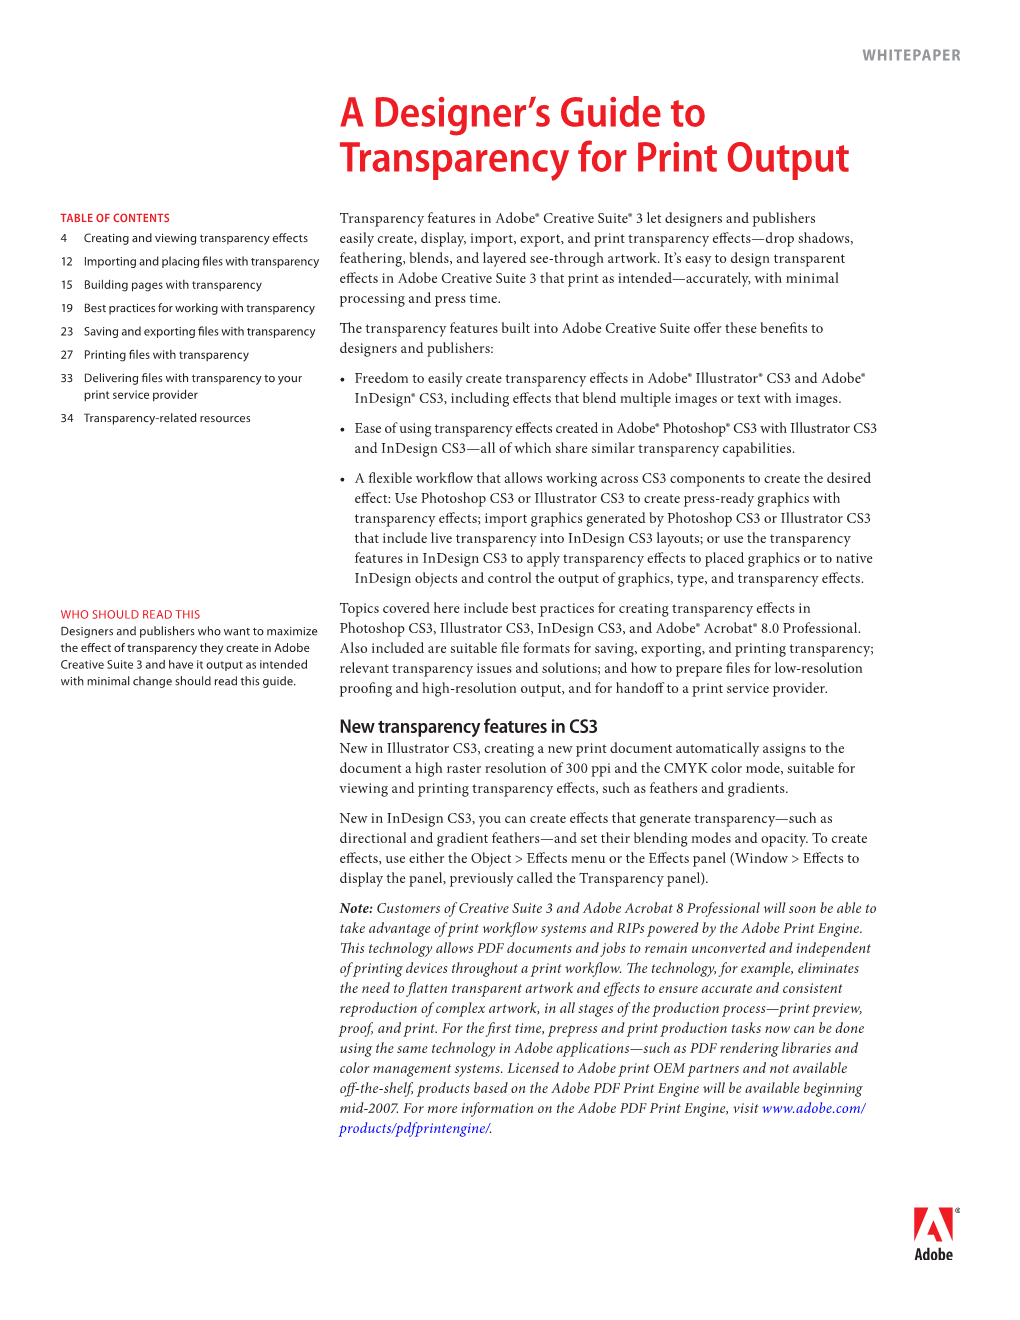 A Designer's Guide to Transparency for Print Output